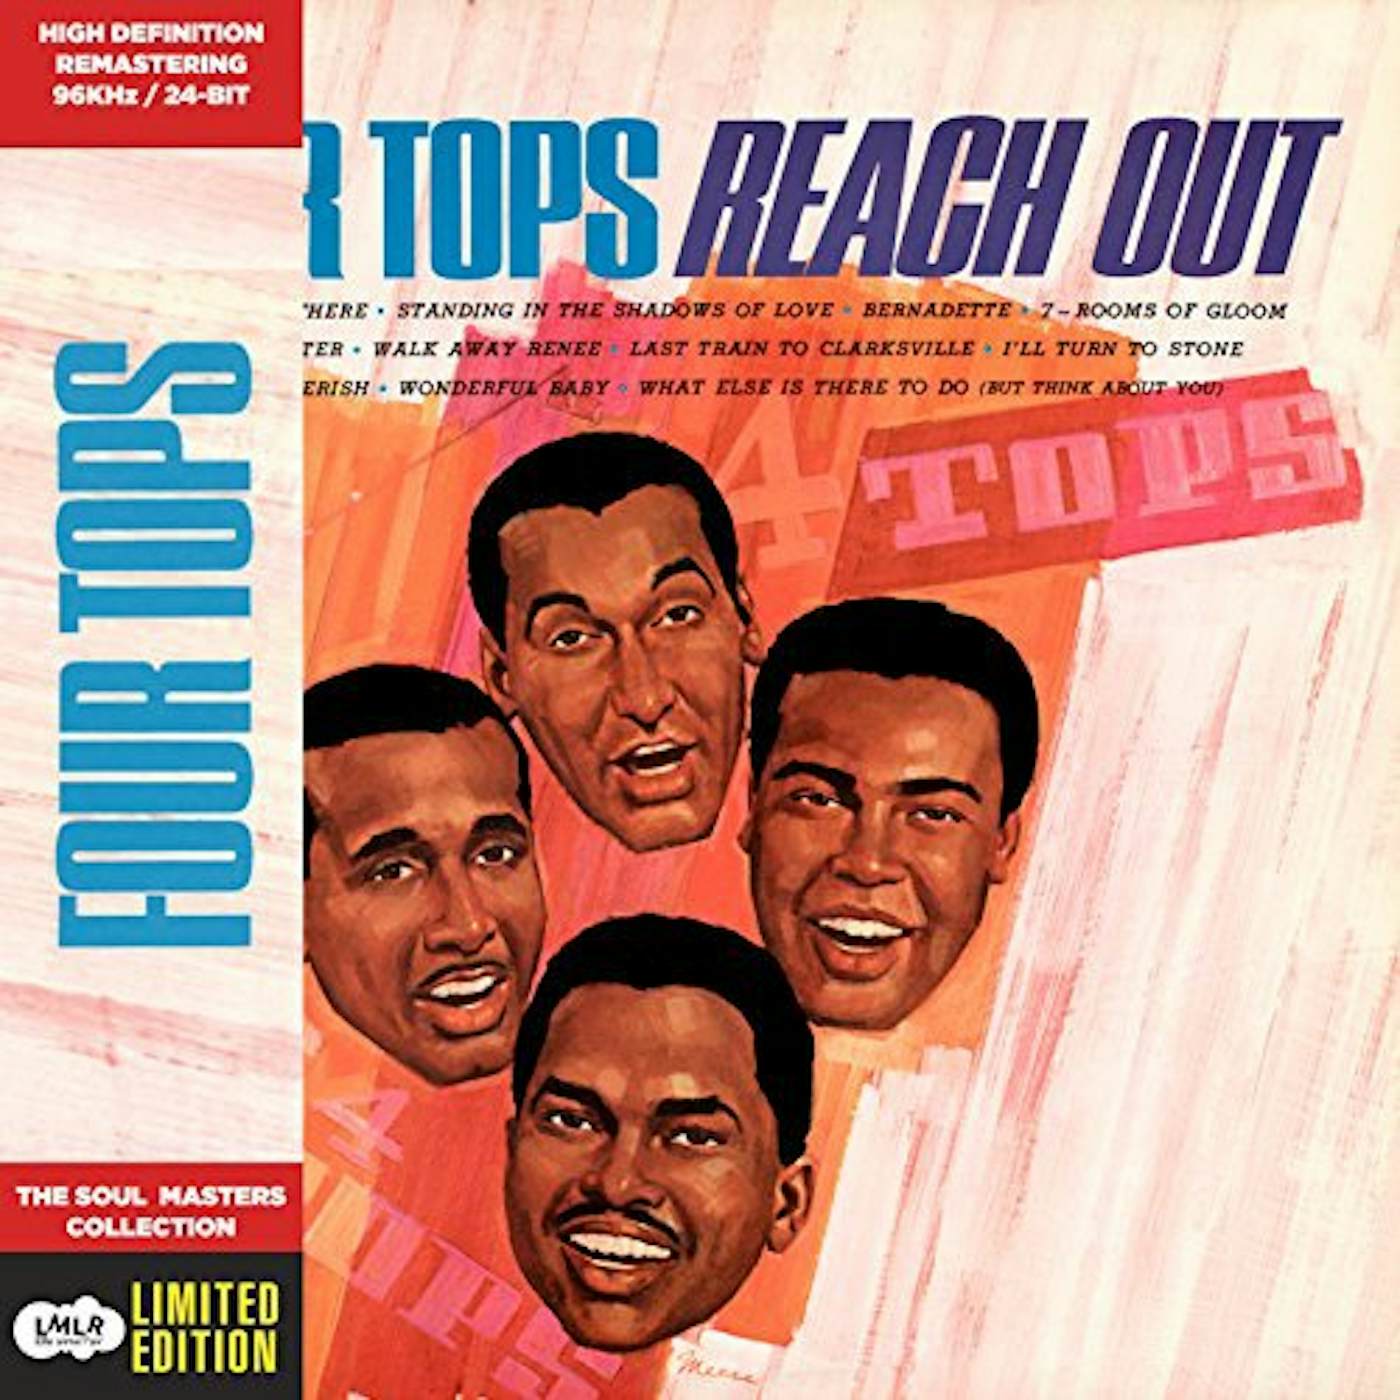 Four Tops REACH OUT CD